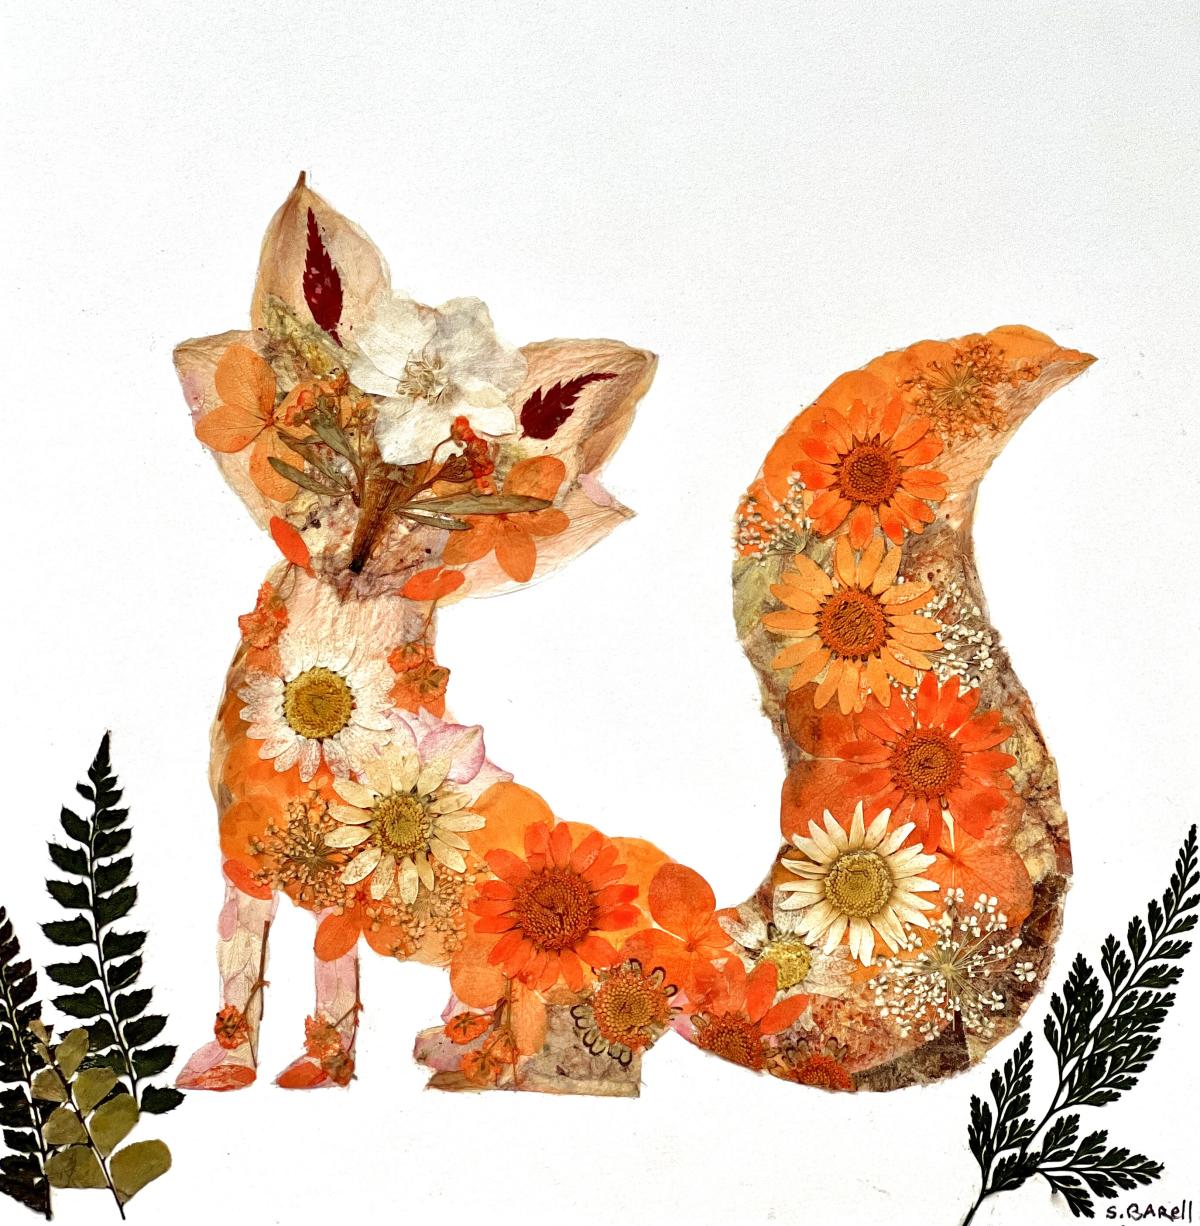 An image of a fox made from pressed flowers in shades of orange and red.